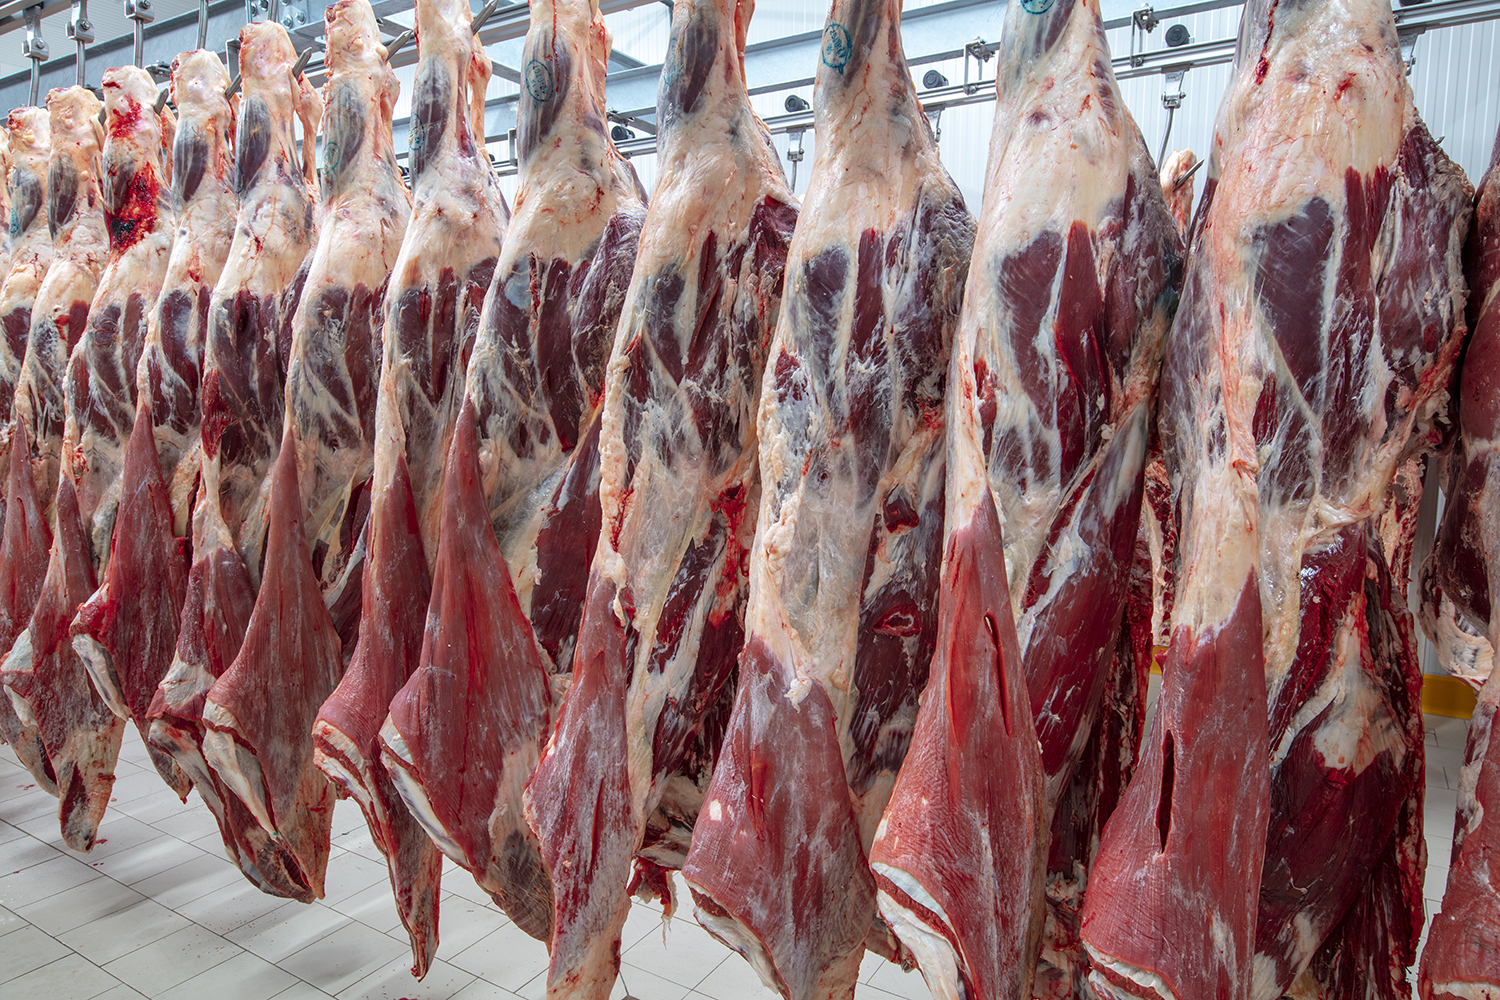 Meat industry,meats hanging in the cold store. Cattles cut and h